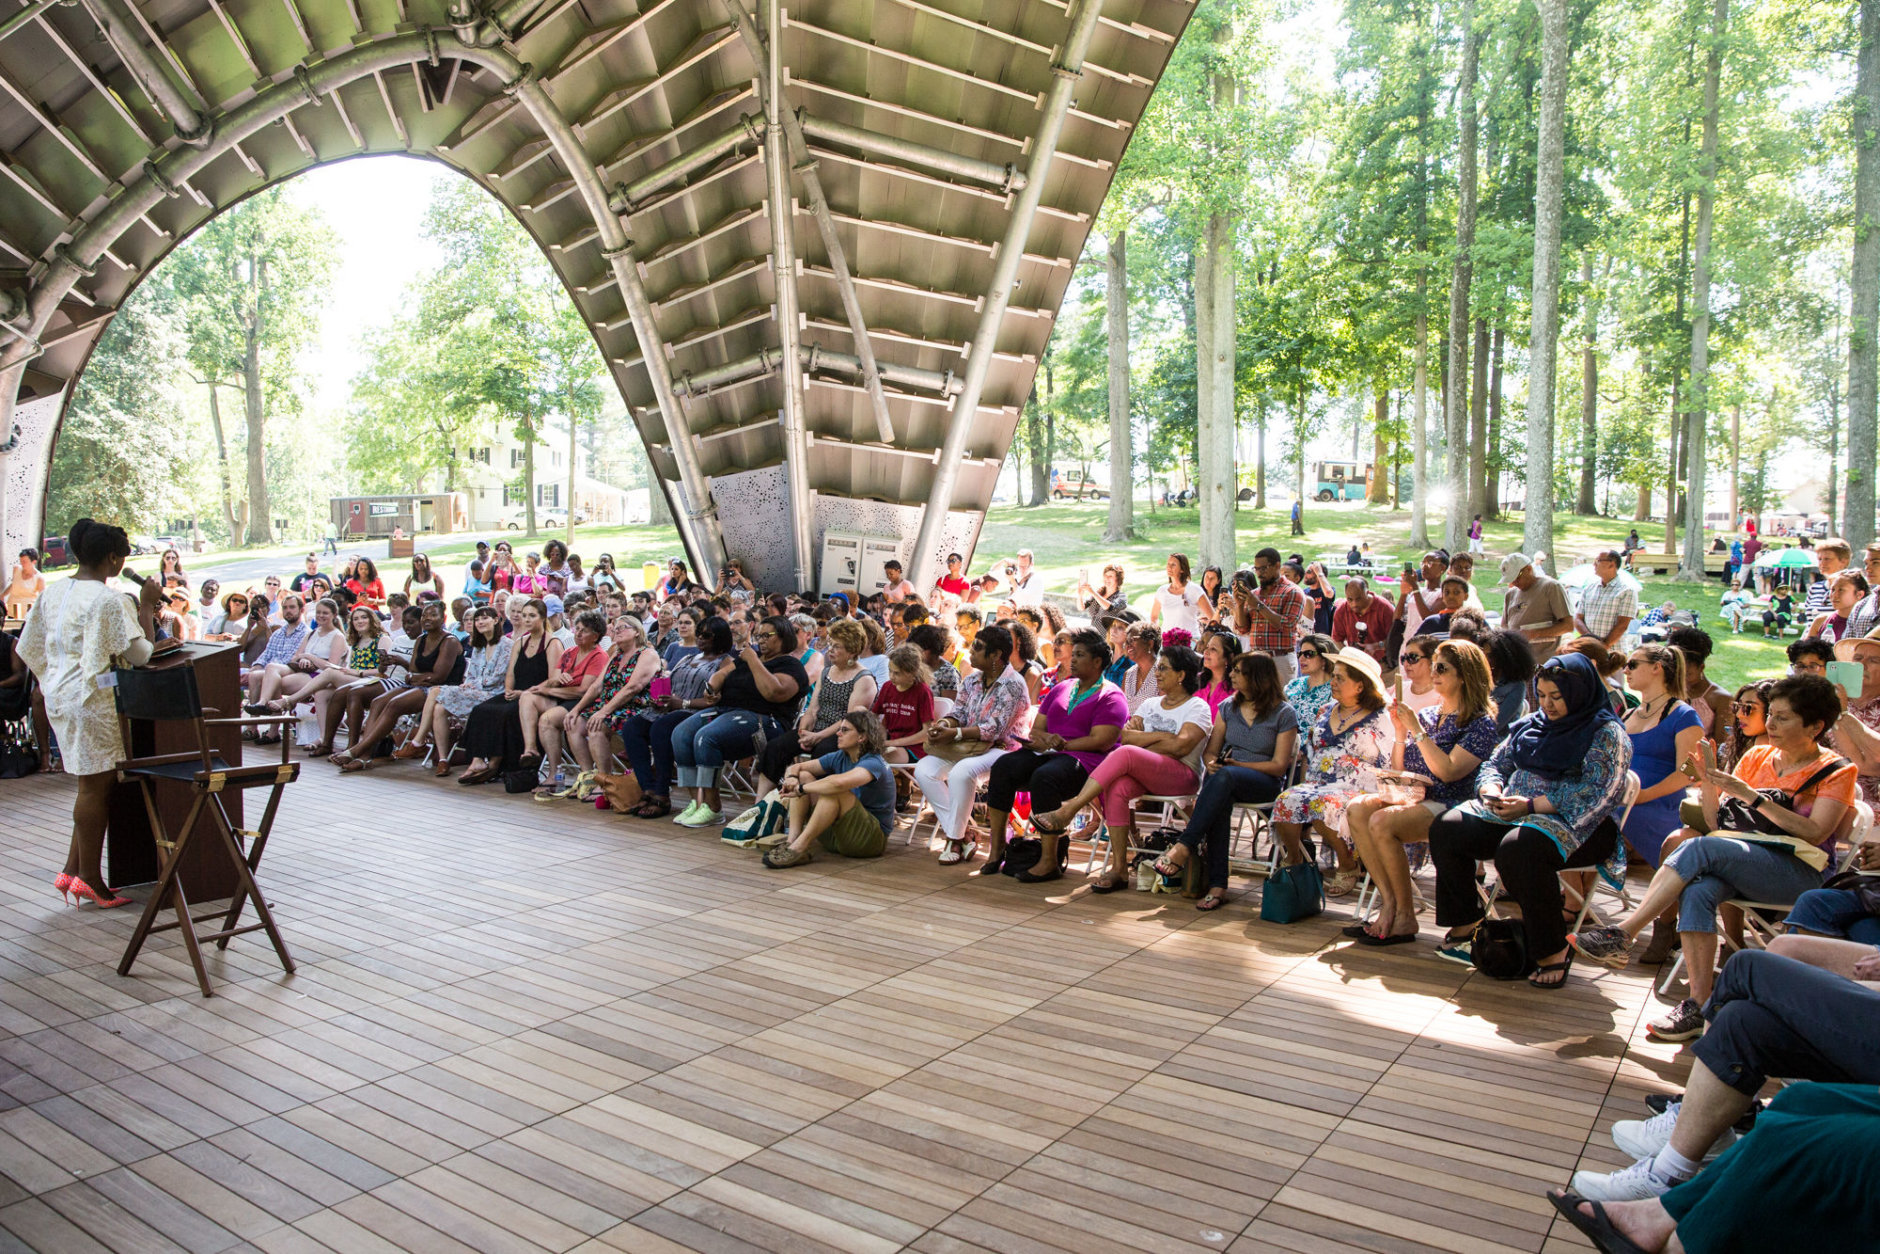 Sunday, June 10 is the second annual Books in Bloom festival in Columbia, Maryland. The event features author readings, panel discussions and family-friendly activities. (Courtesy Books in Bloom) 